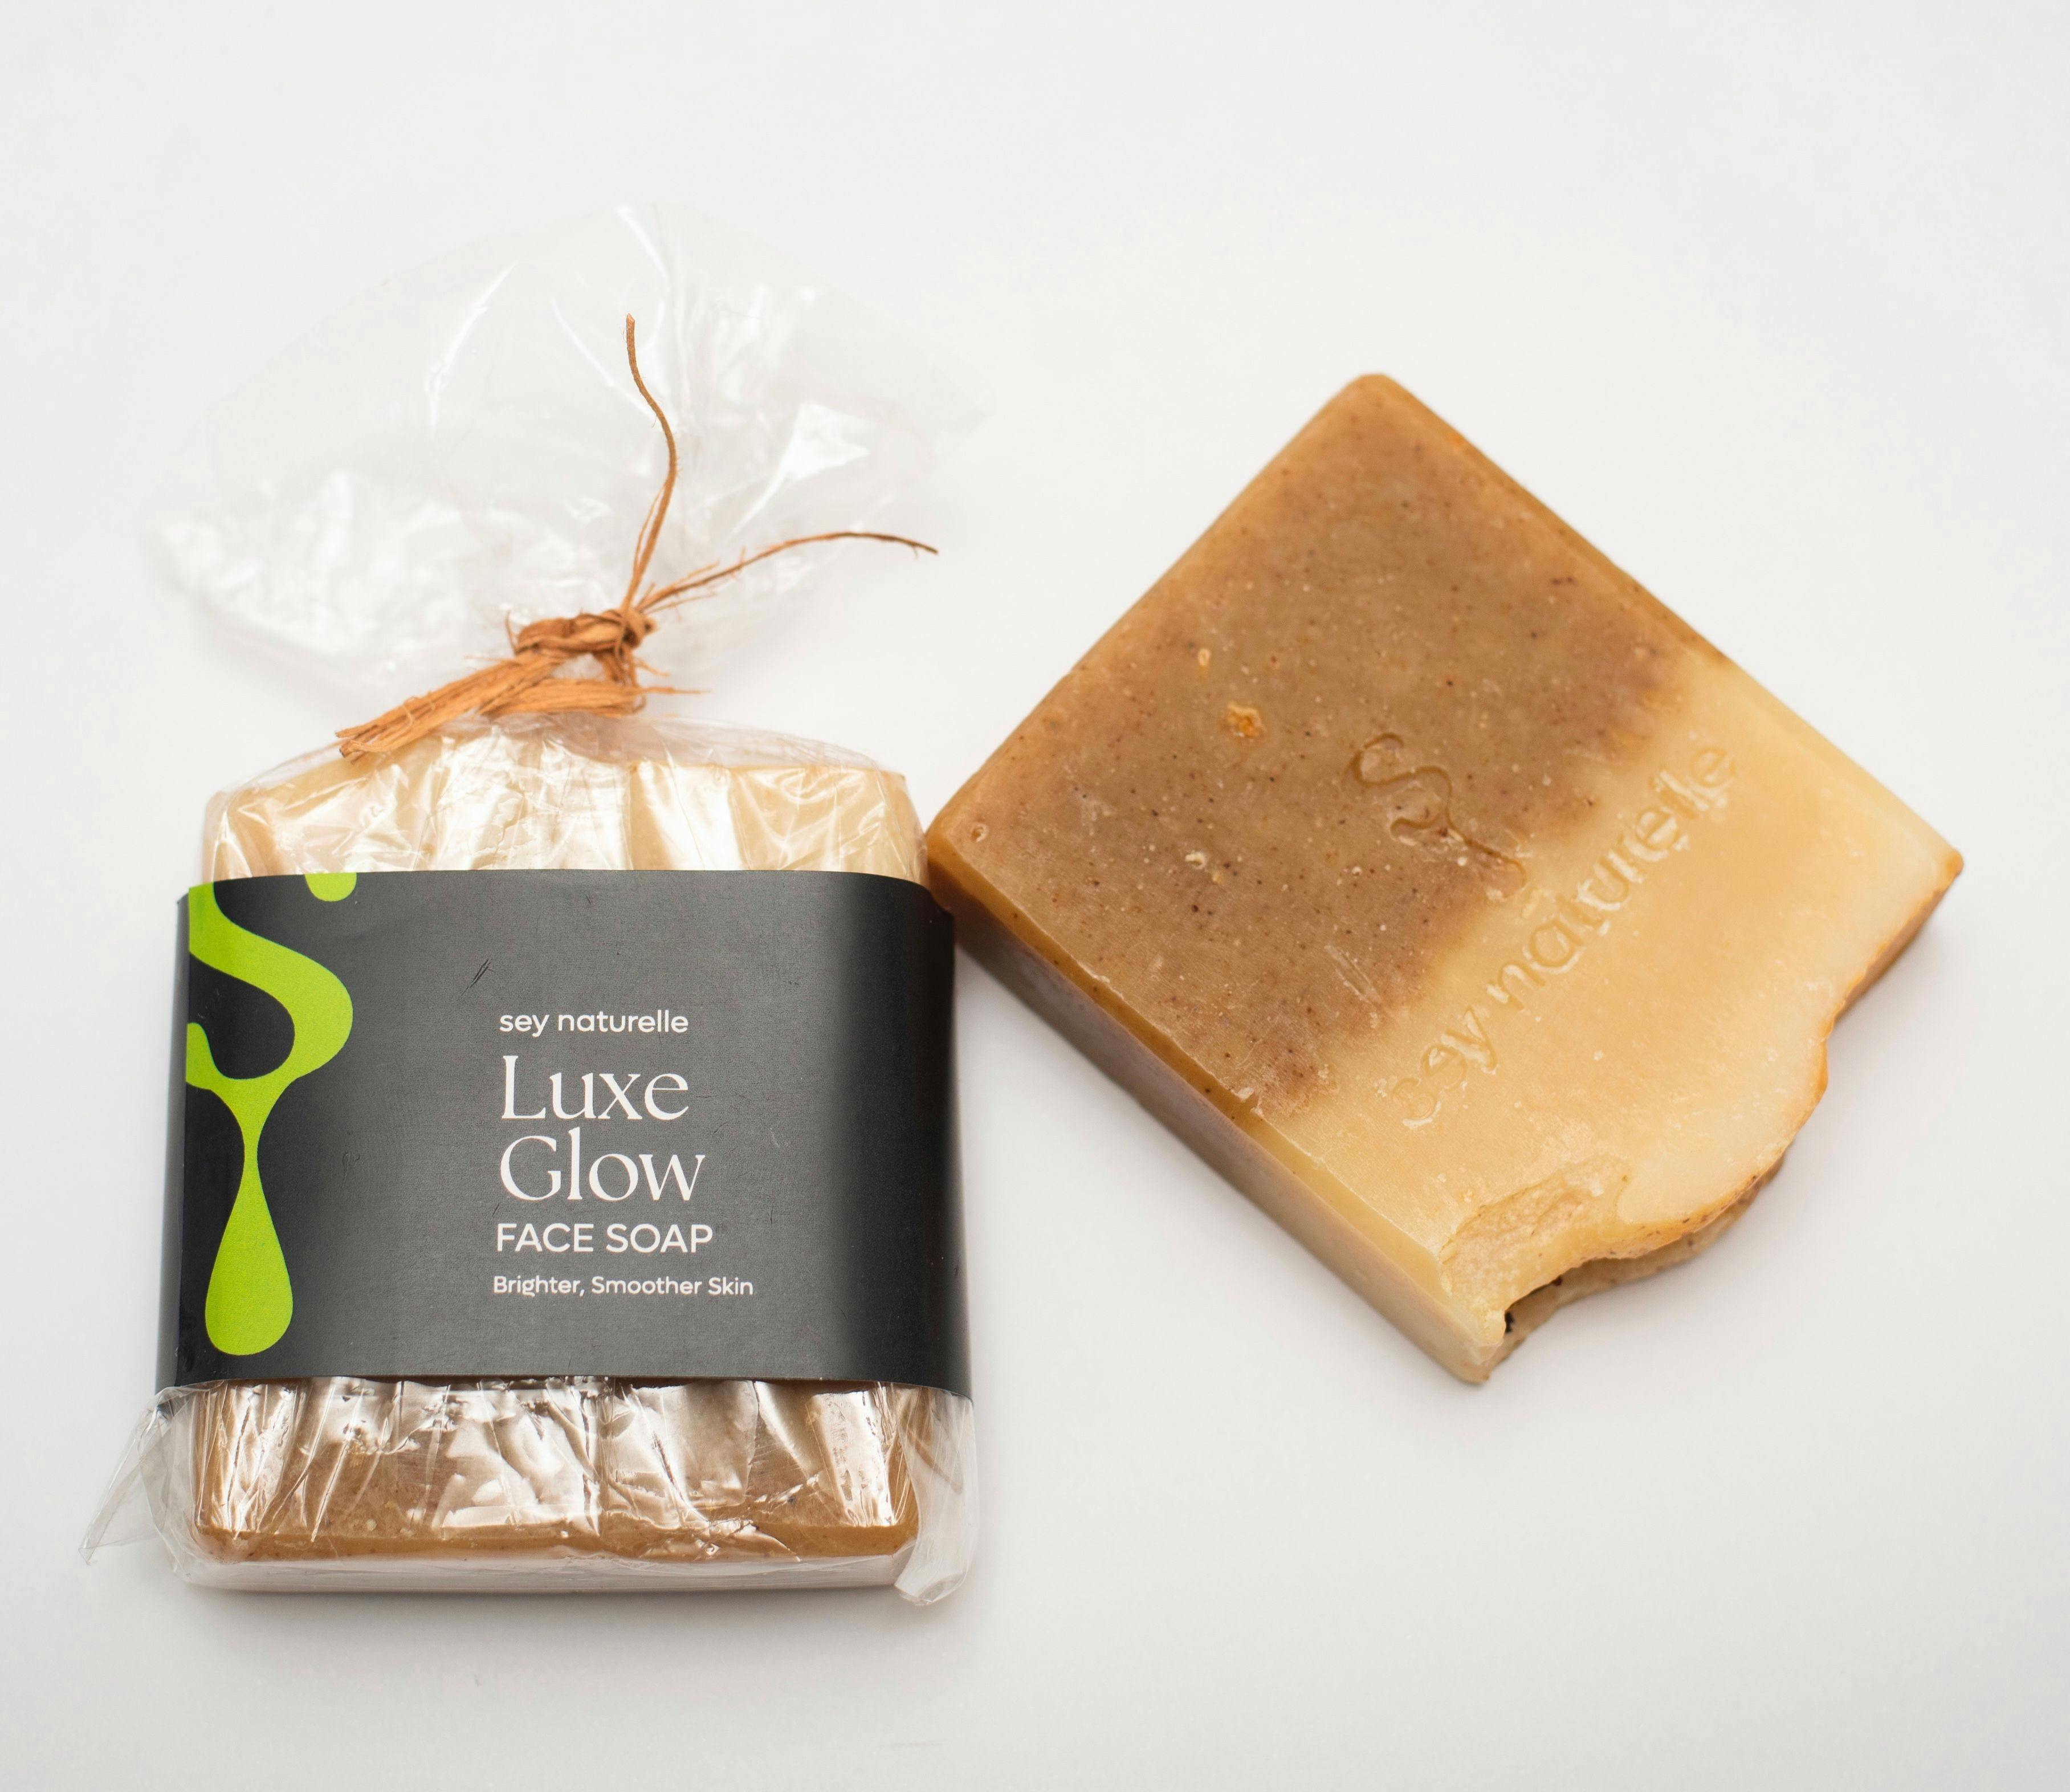 Luxe Glow Face Soap